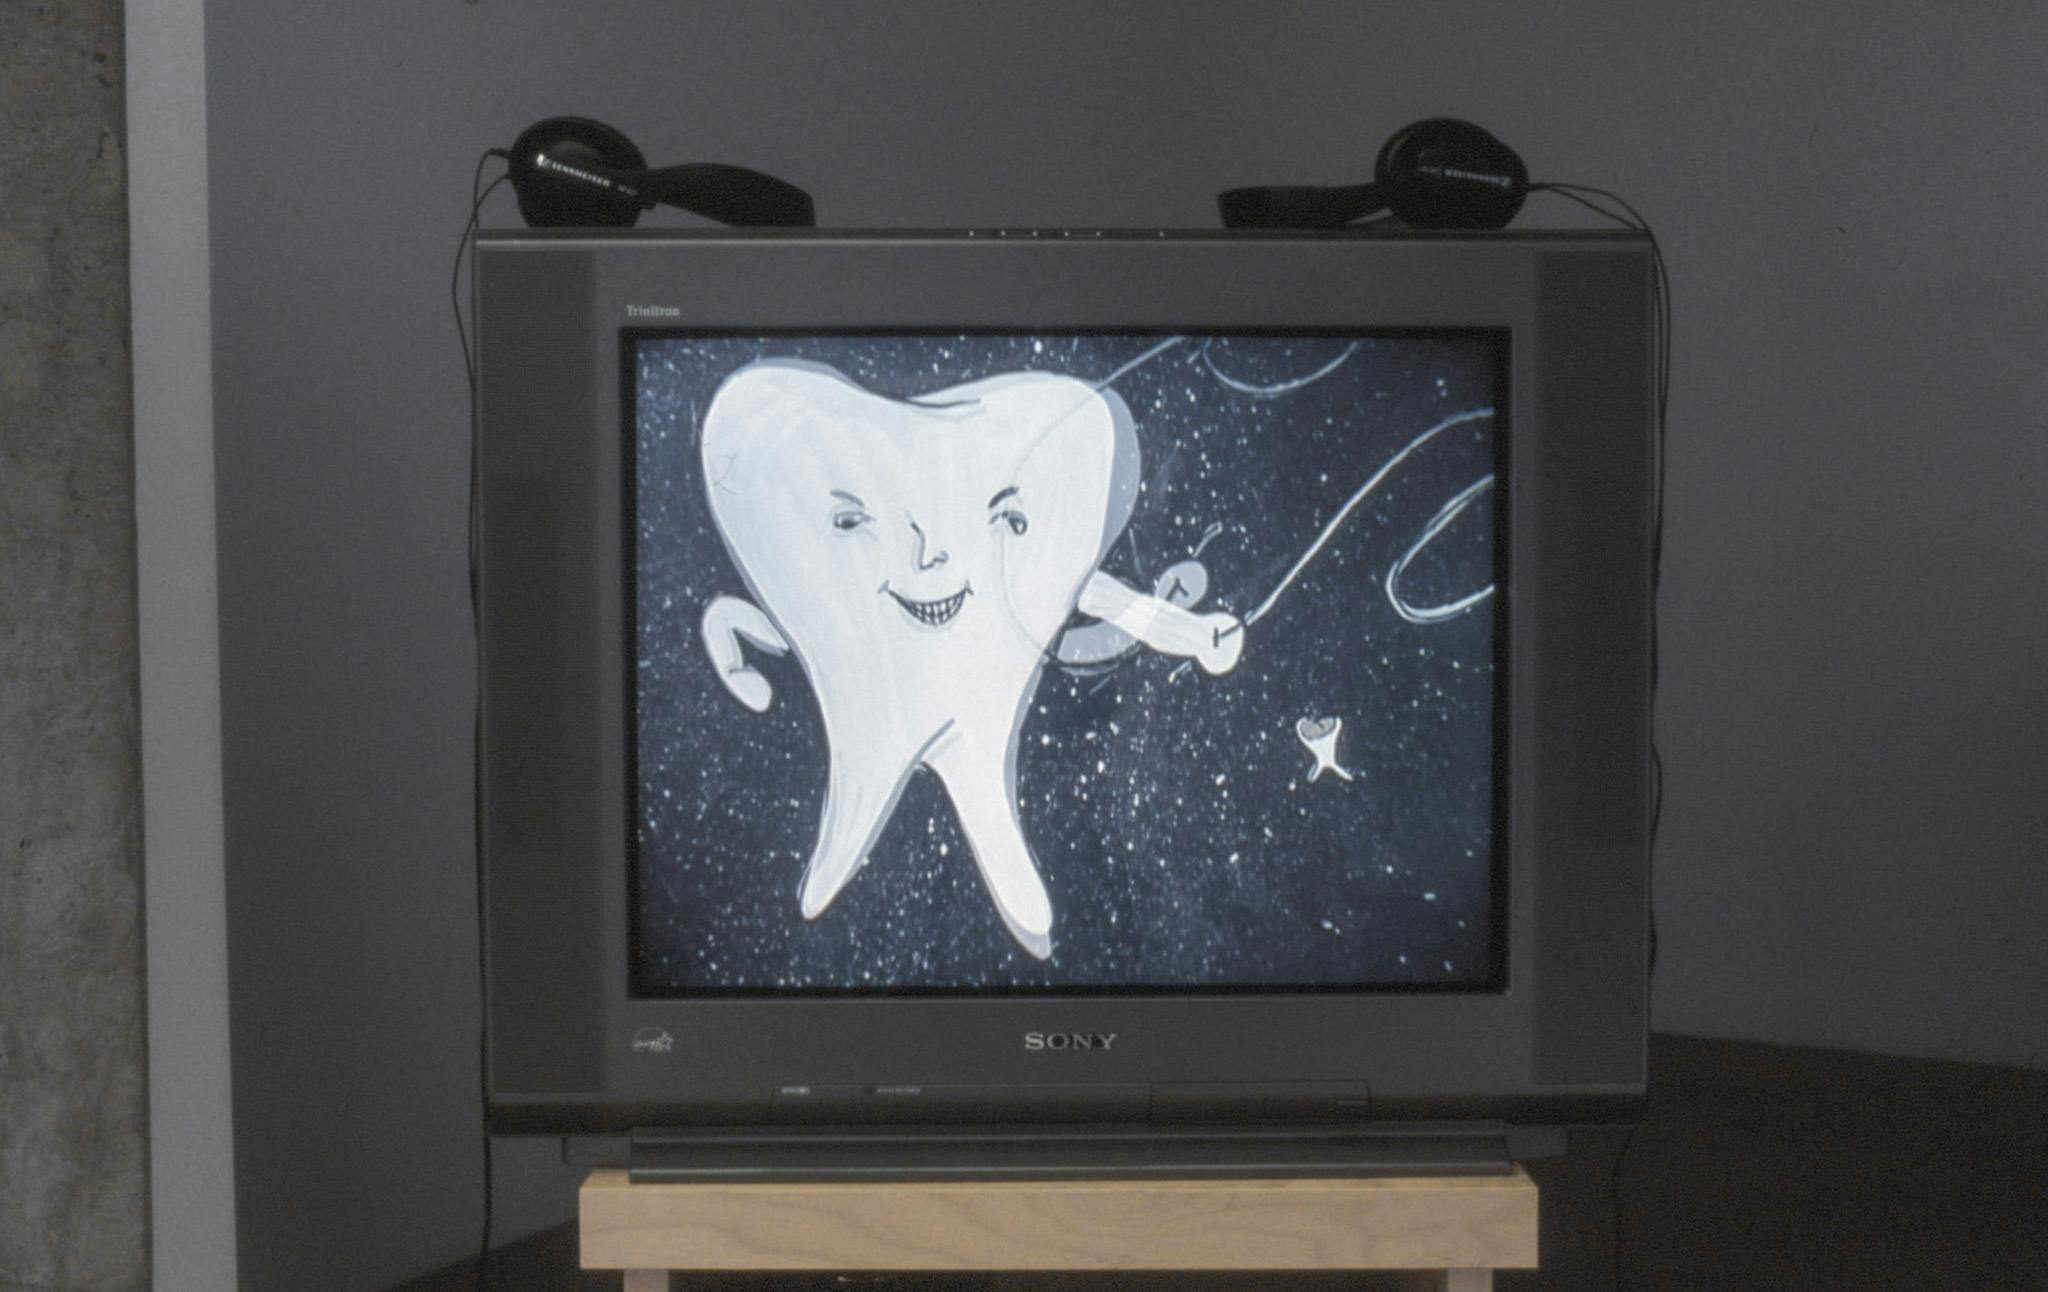 Detail of a video installation by Marina Roy. A CRT TV shows a black and white illustration of a character, whose body looks like a tooth fallen off, standing in a dark background filled with stars.